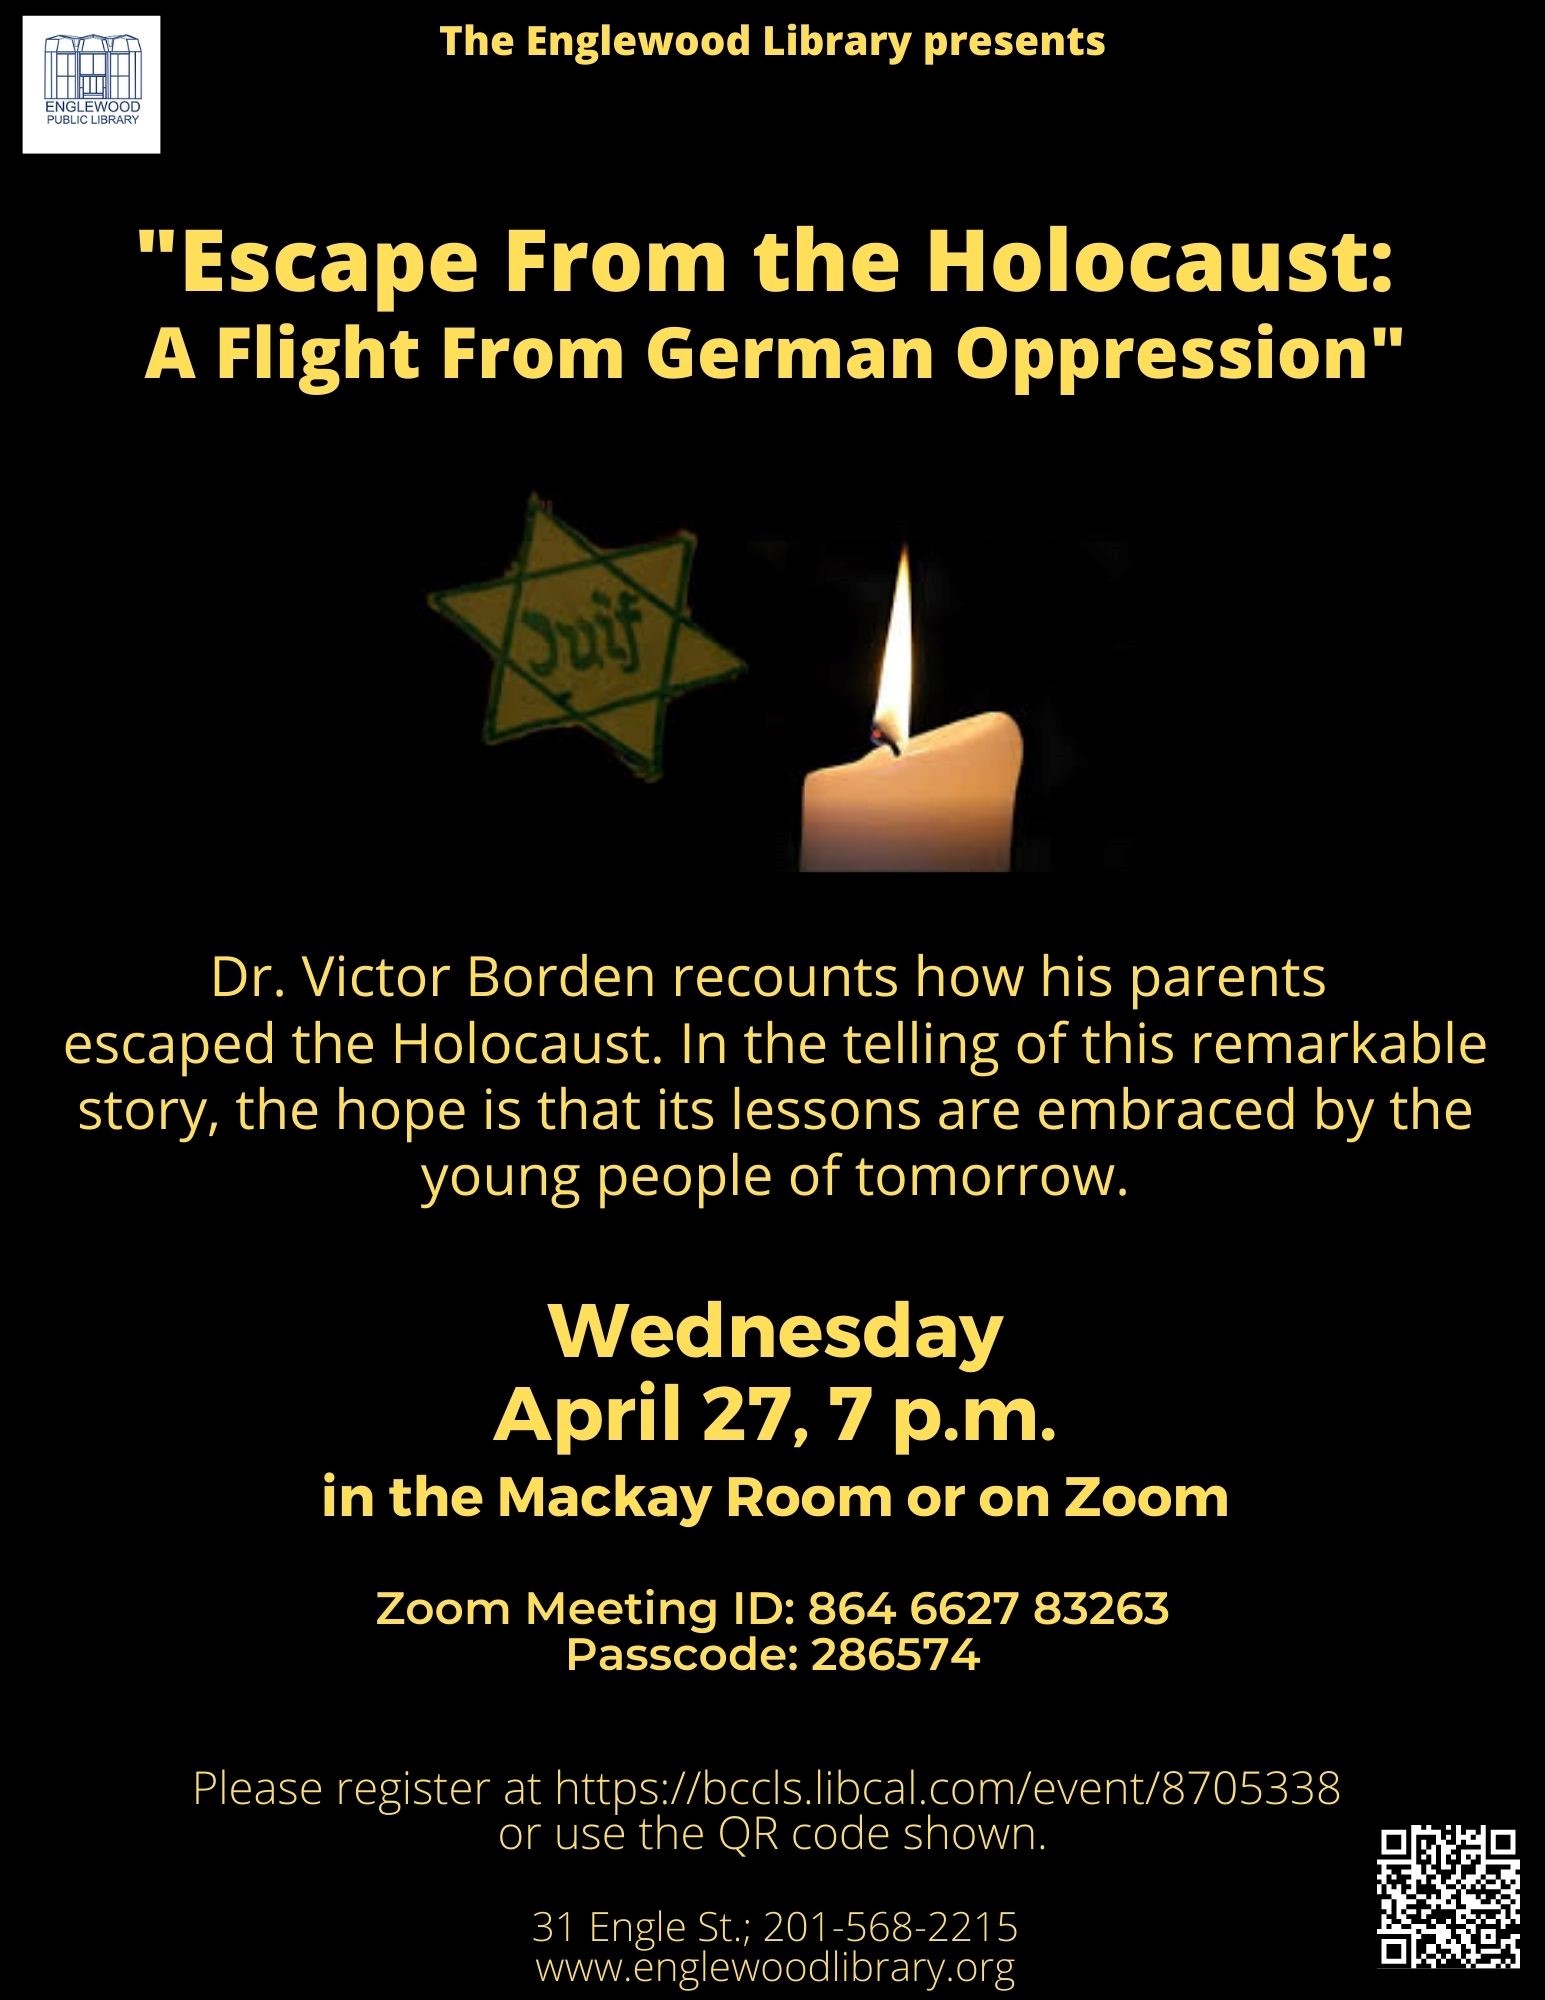 Escape From the Holocaust